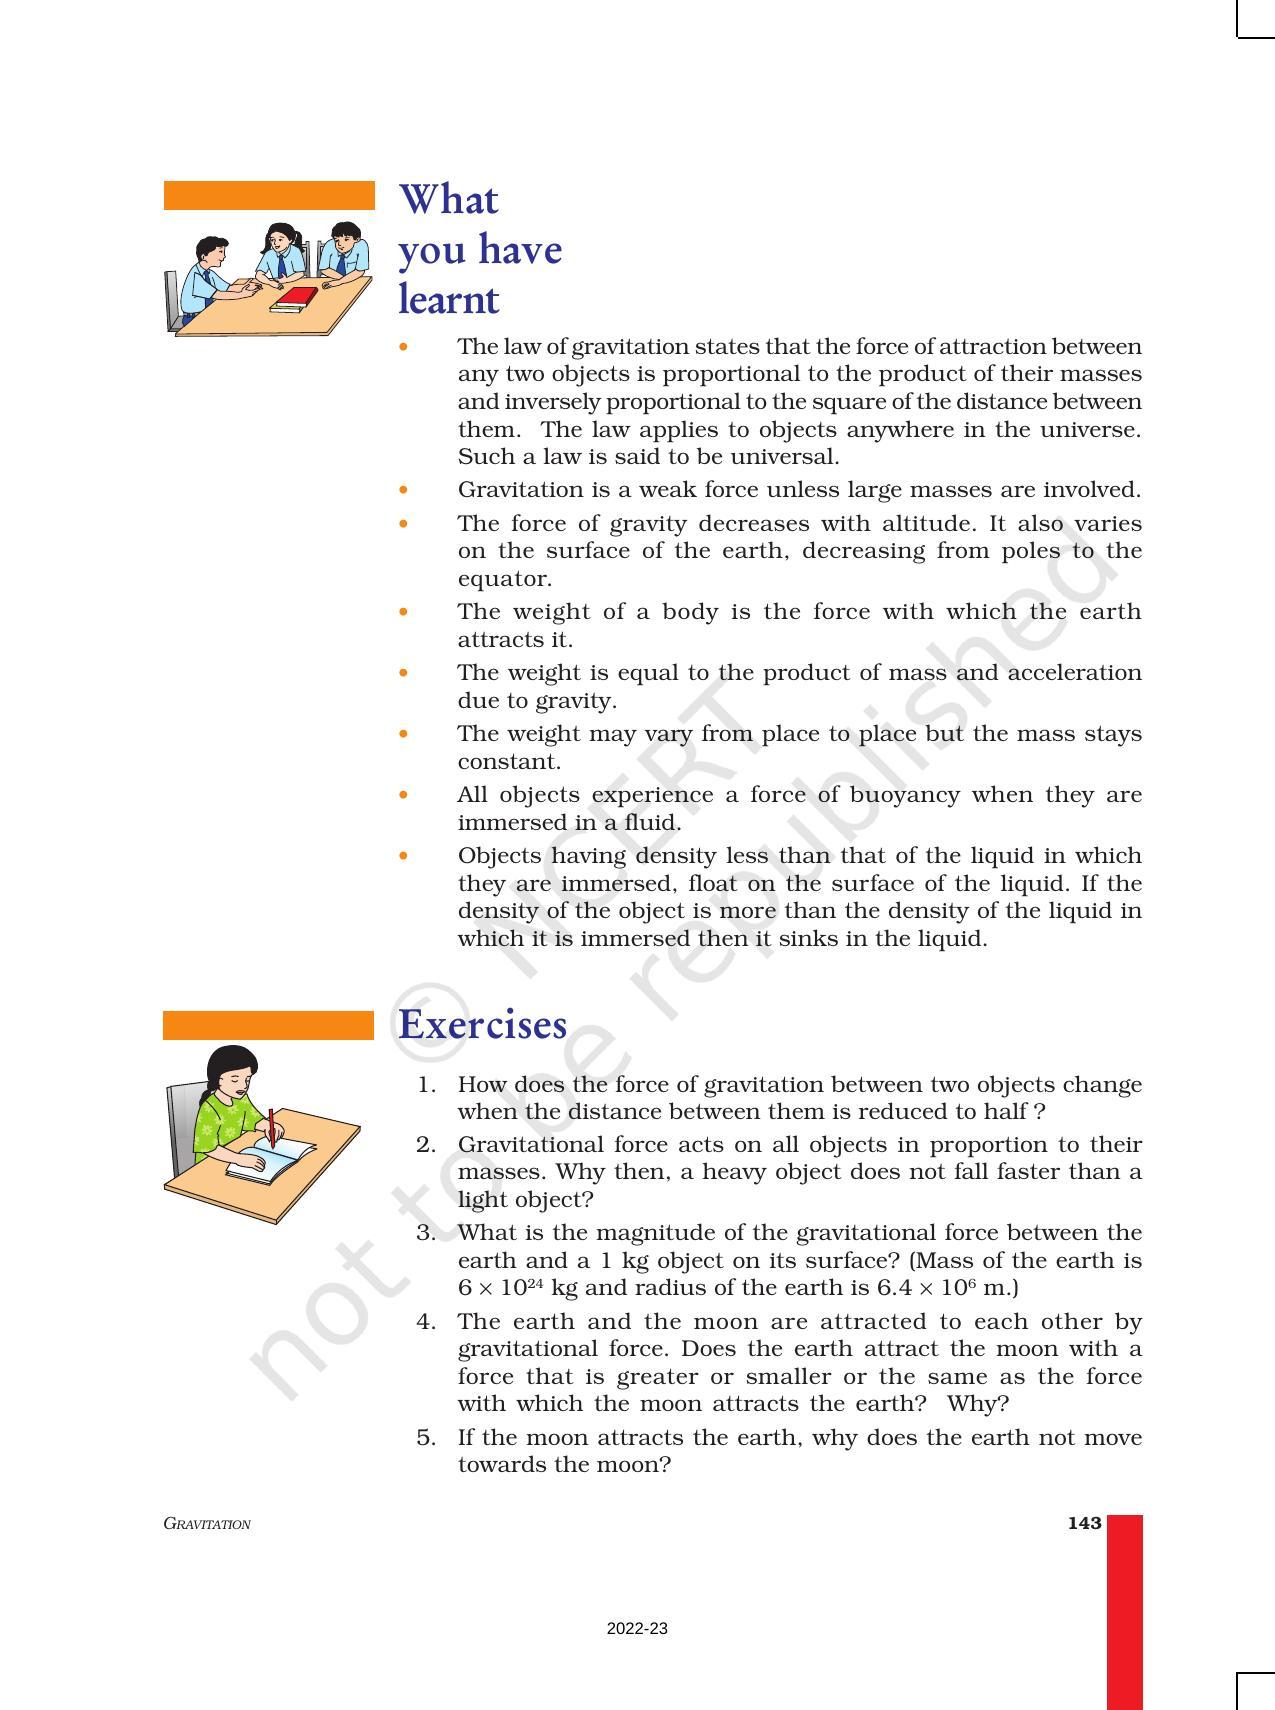 NCERT Book for Class 9 Science Chapter 10 Gravitation - Page 13